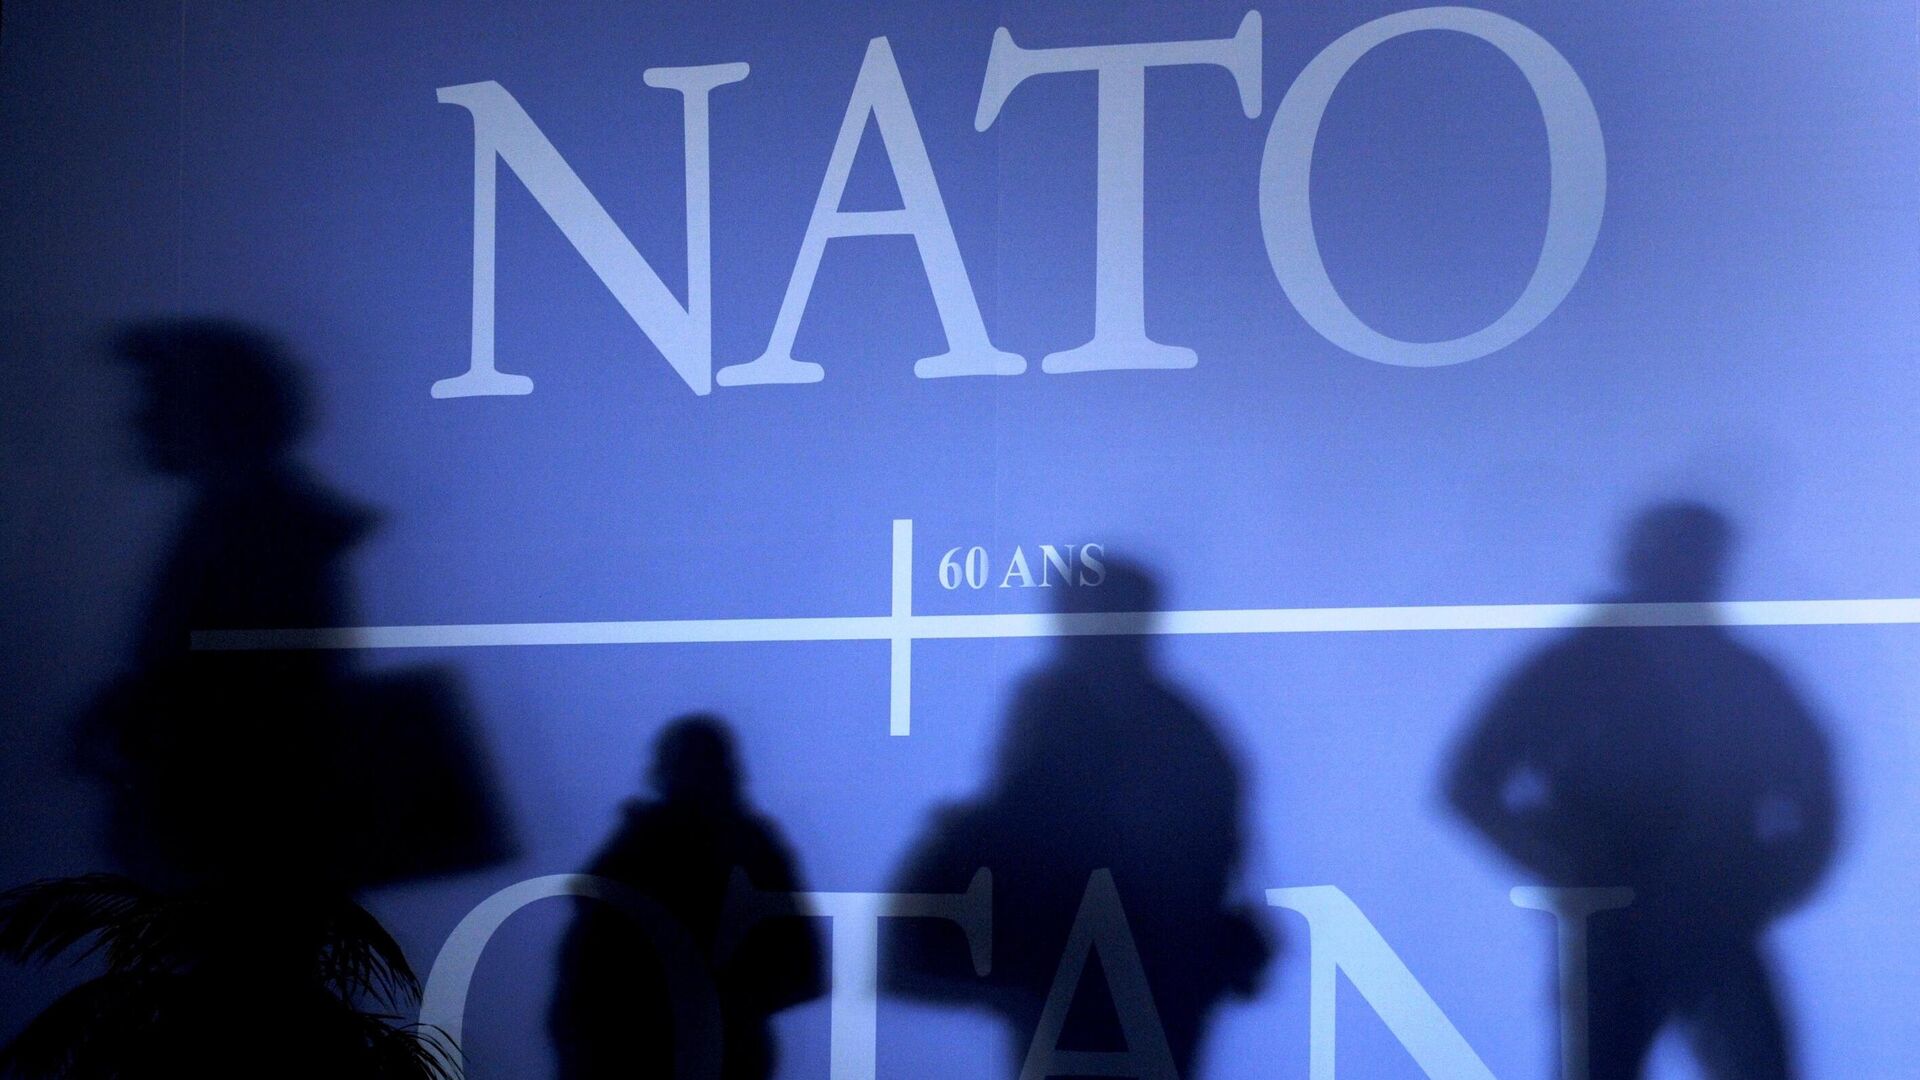 This April 2, 2009 file photo shows shadows cast on a wall decorated with the NATO logo and flags of NATO countries in Strasbourg, eastern France, before the start of the NATO summit which marked the organisation's 60th anniversary.  - Sputnik International, 1920, 30.06.2022